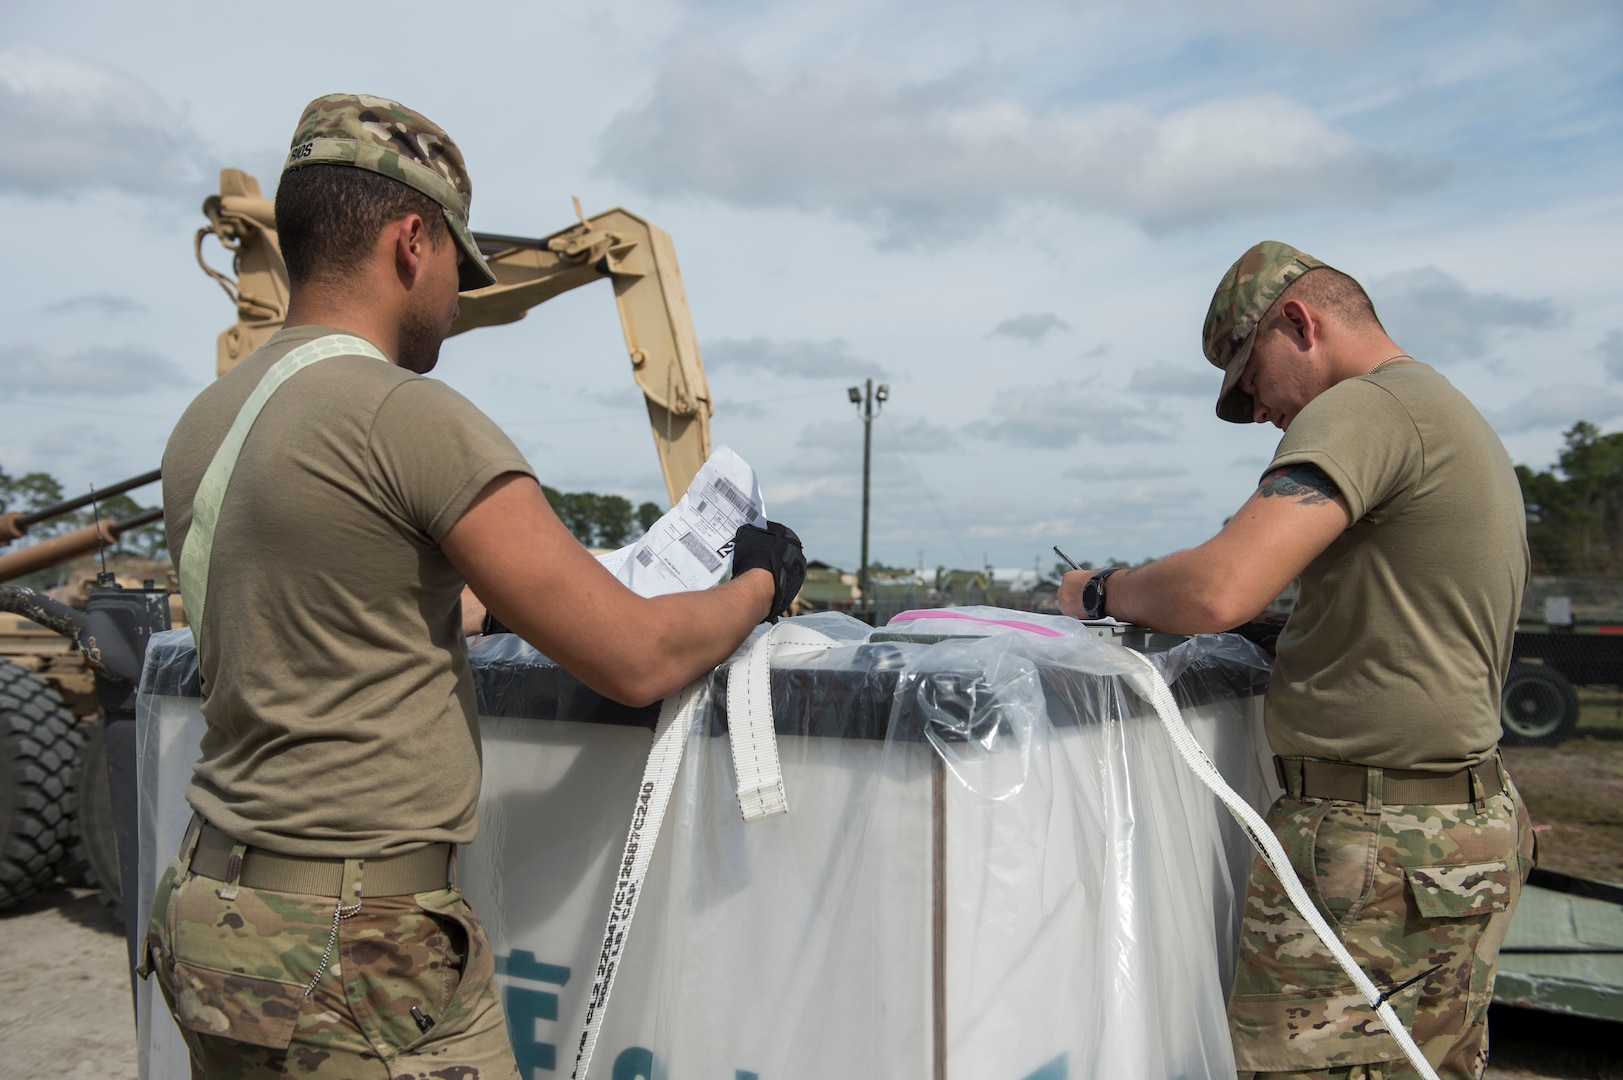 U.S. Army Spc. Yadiel Rios (left) and Sgt. Christopher Keys (right), 689th Rapid Port Opening Element transportation management coordinators, process simulated relief supplies as part of Exercise Turbo Distribution at Fort Stewart-Hunter Army Airfield, Georgia, Feb. 12, 2020. The Airmen are part of a Joint Task Force-Port Opening unit, a self-sustaining unit capable of rapidly loading and unloading aircraft cargo, maintaining and preparing equipment, and centralizing operations through a command and control station. (U.S. Air Force photo by Staff Sgt. Sarah Brice)